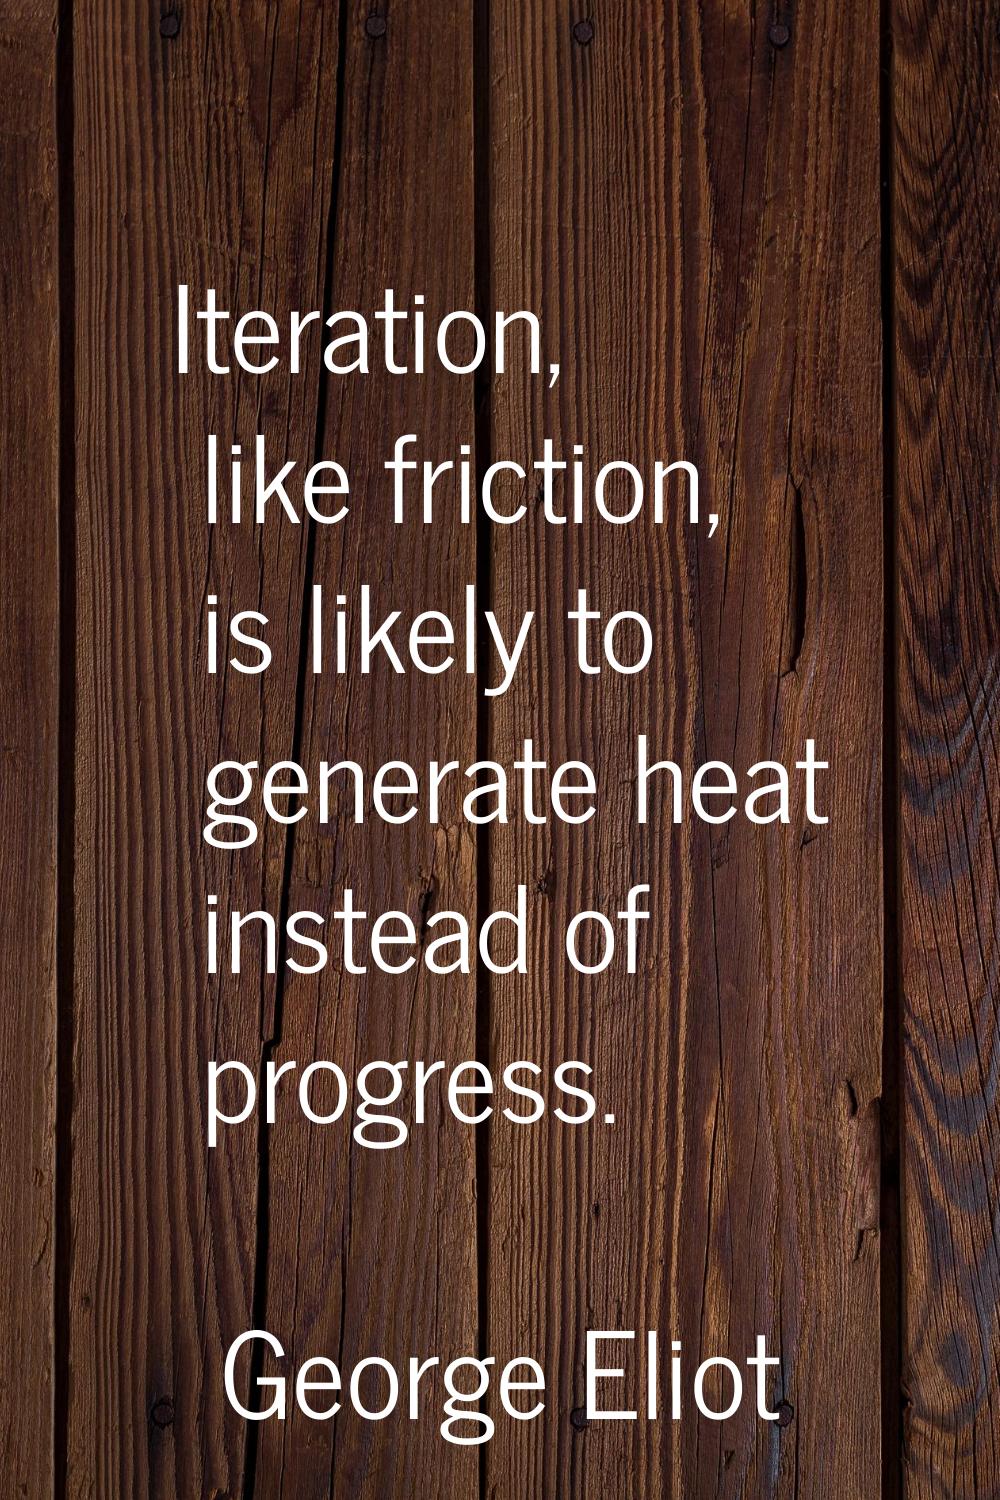 Iteration, like friction, is likely to generate heat instead of progress.